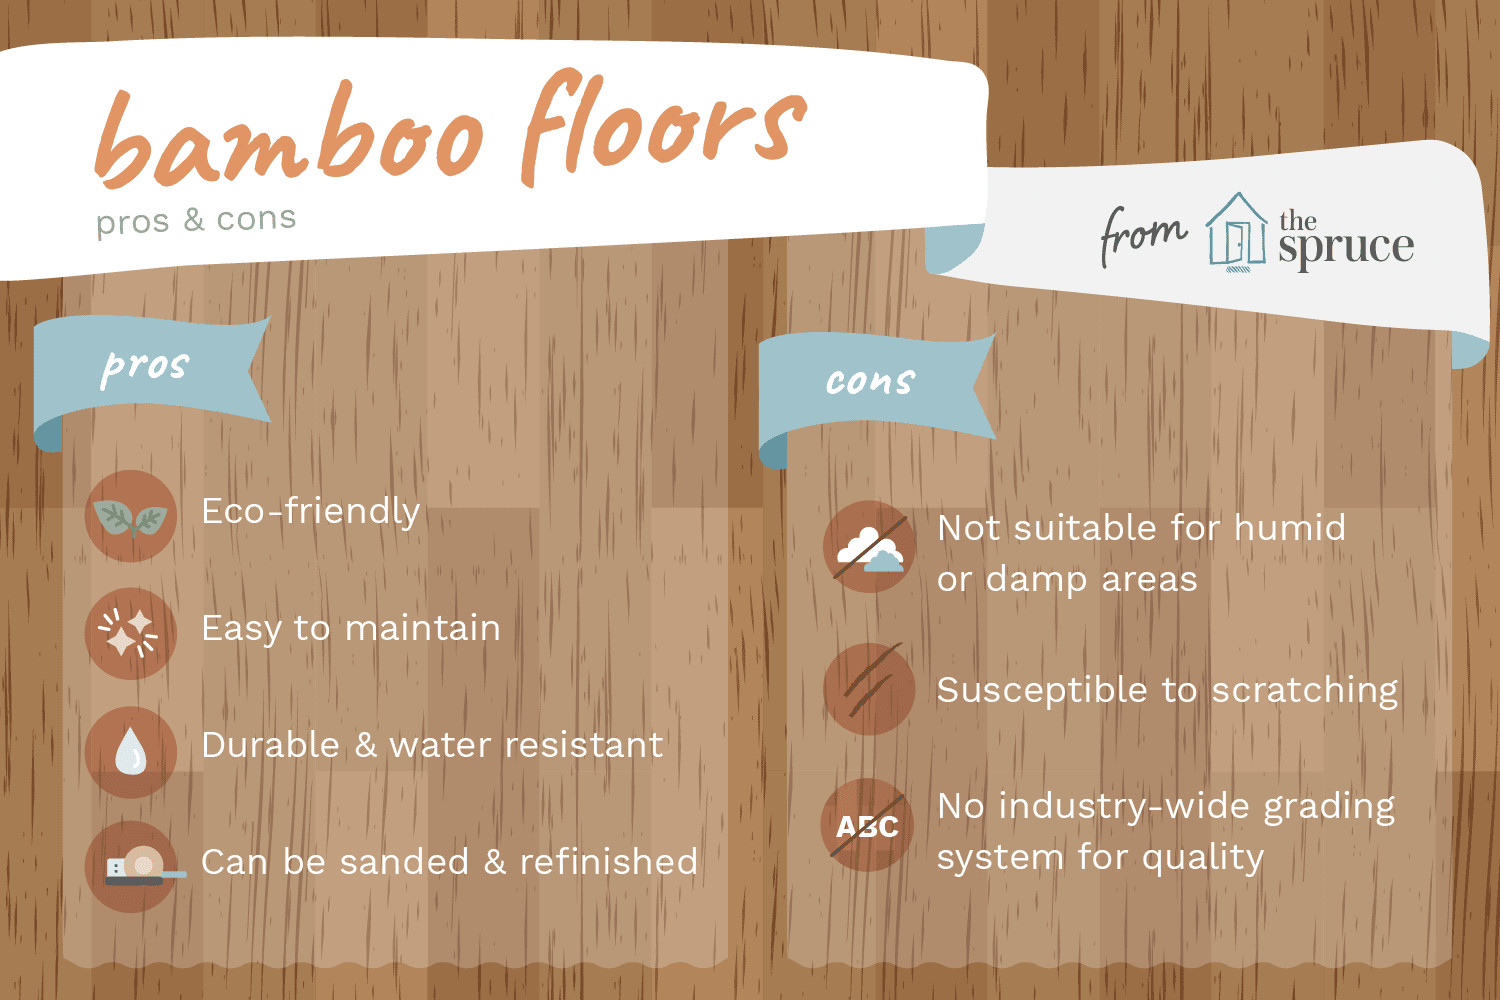 13 attractive Cost to Refinish Hardwood Floors In California 2022 free download cost to refinish hardwood floors in california of the advantages and disadvantages of bamboo flooring intended for benefits and drawbacks of bamboo floors 1314694 v3 5b102fccff1b780036c0a4fa